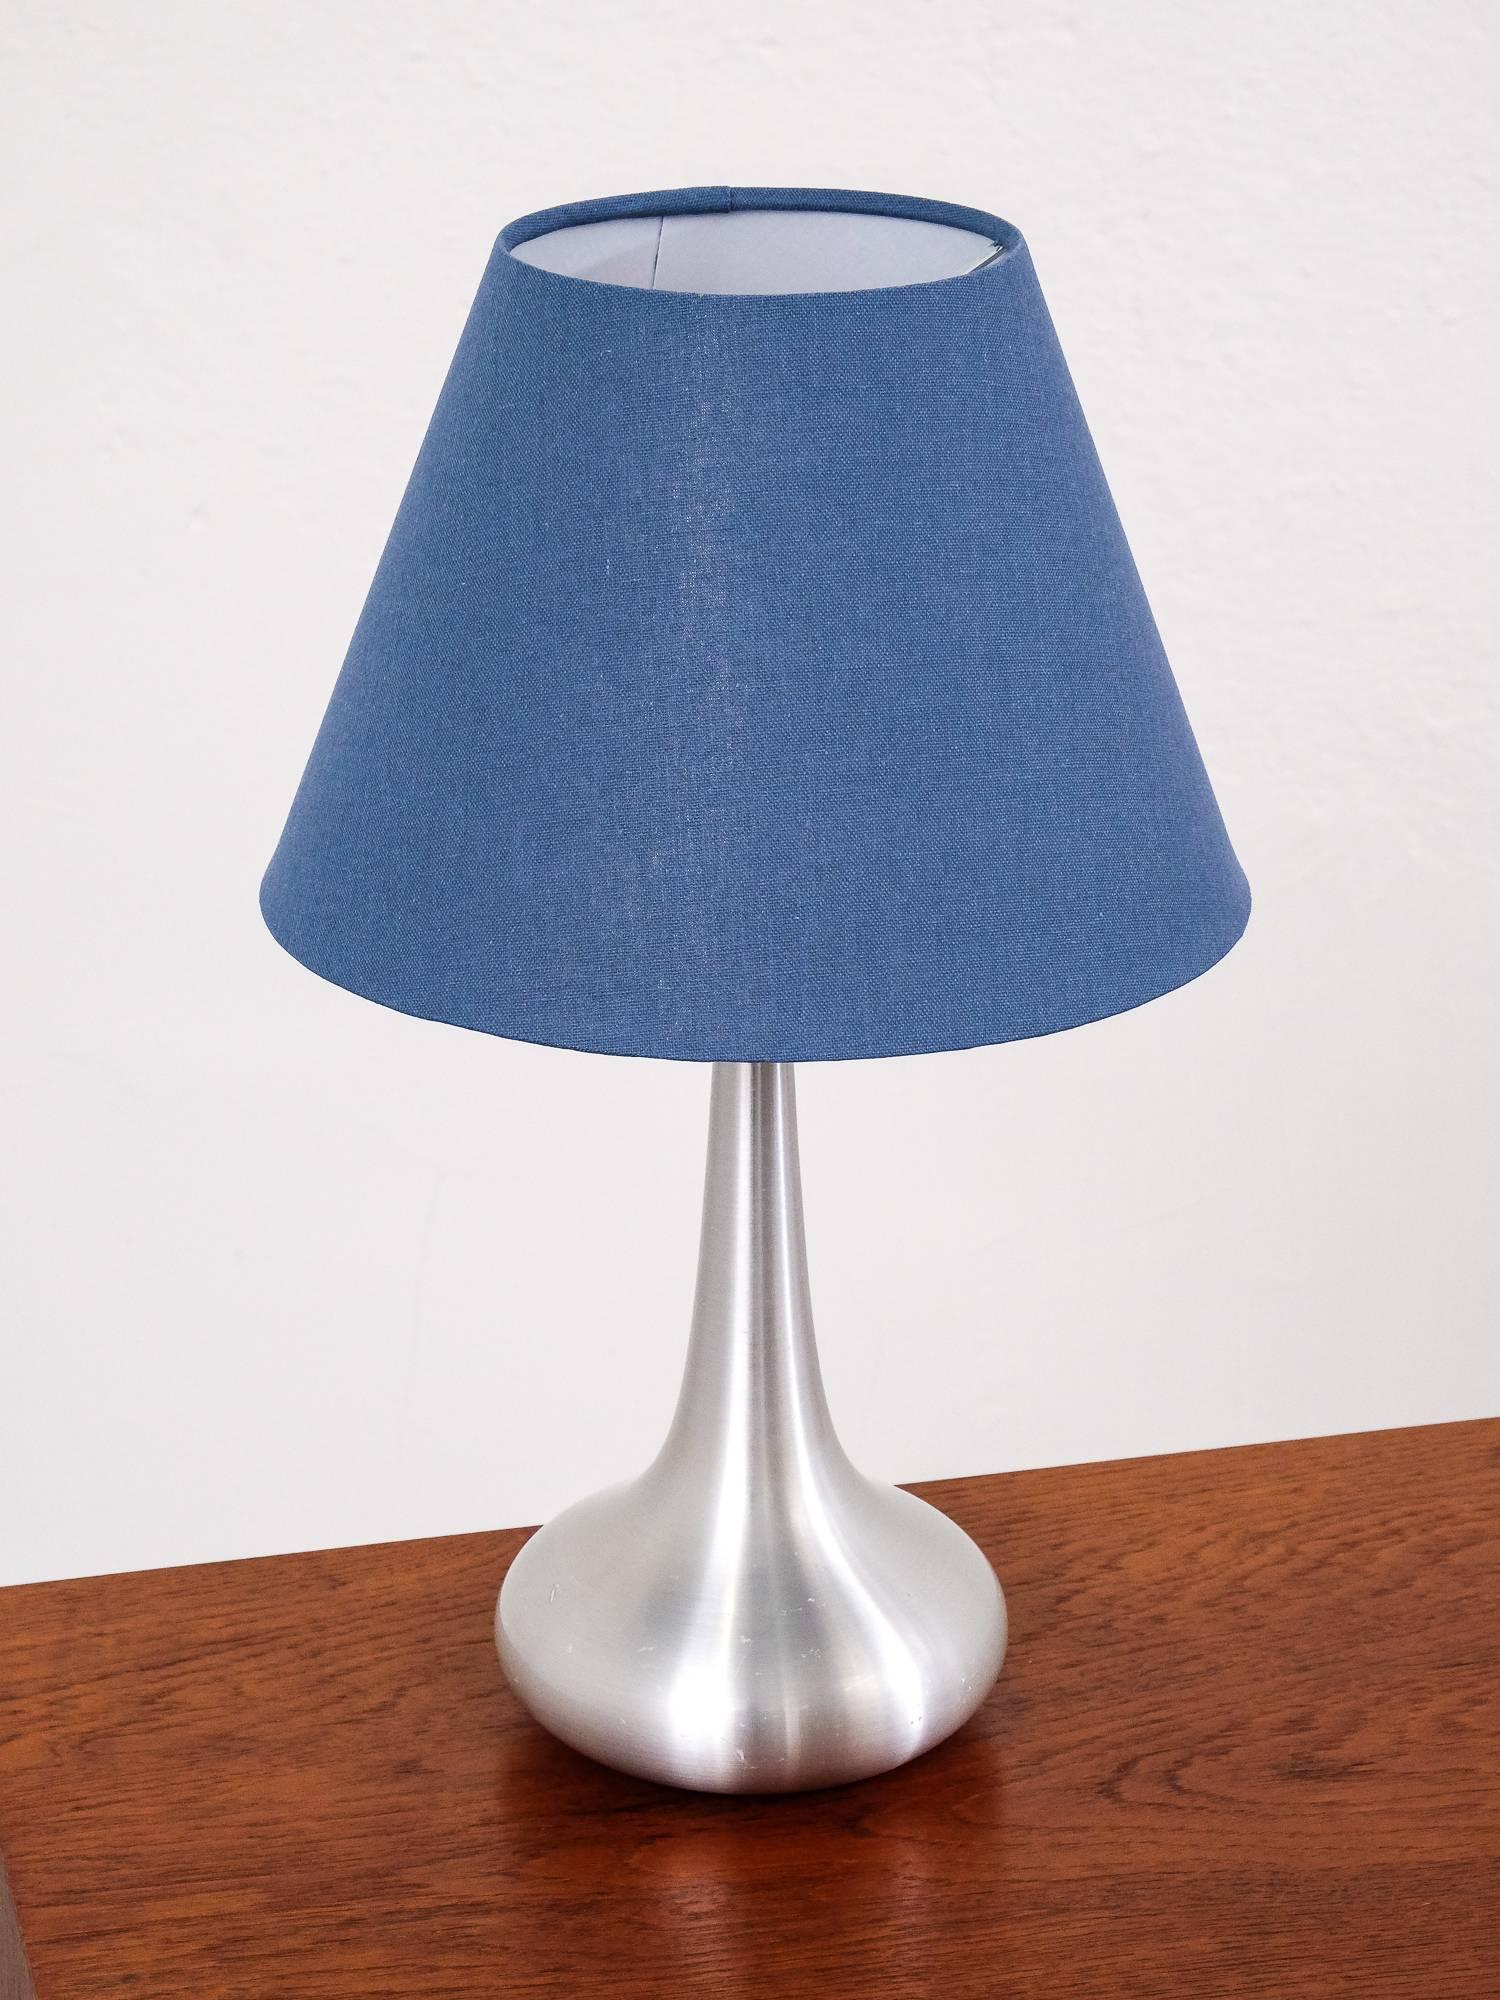 'Orient' table lamp was designed by Jo Hammerborg during the 1960s and manufactured by Fog & Mørup in Denmark. This is the 'Mini' version. The lamp body is made from aluminium. Comes with a new shade. It remains in a good vintage condition with a